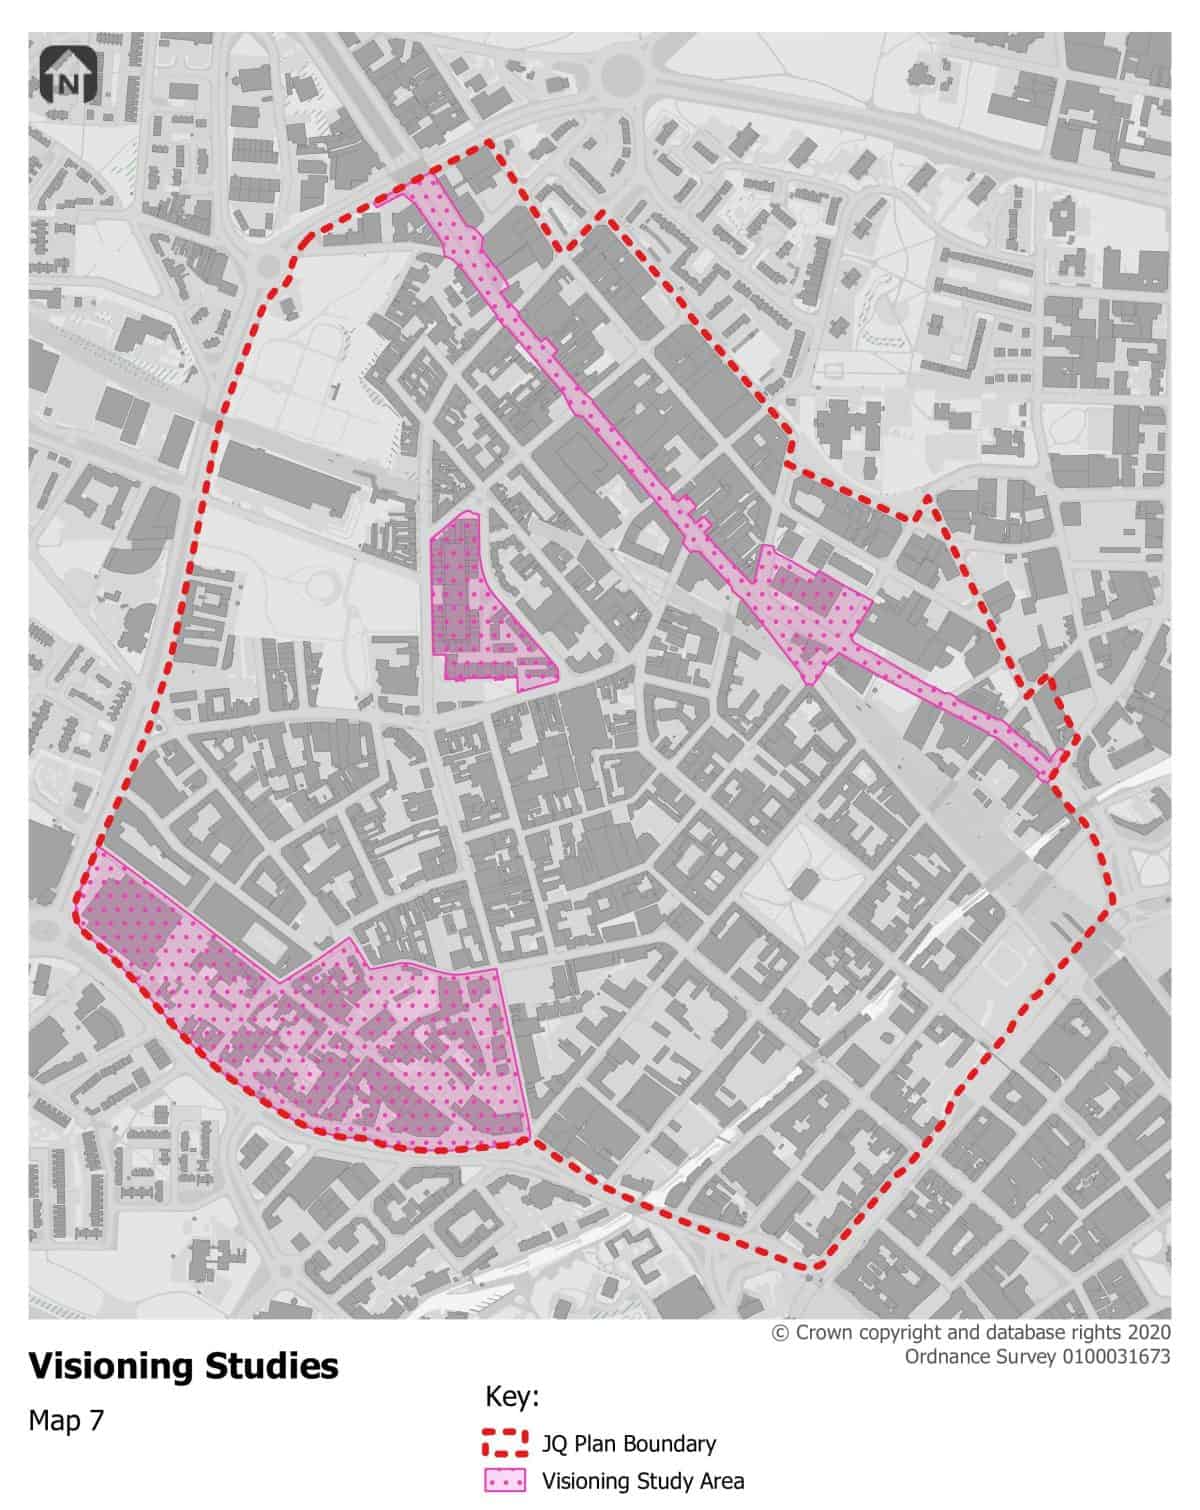 Map of the Jewellery Quarter highlighting the three areas for the study